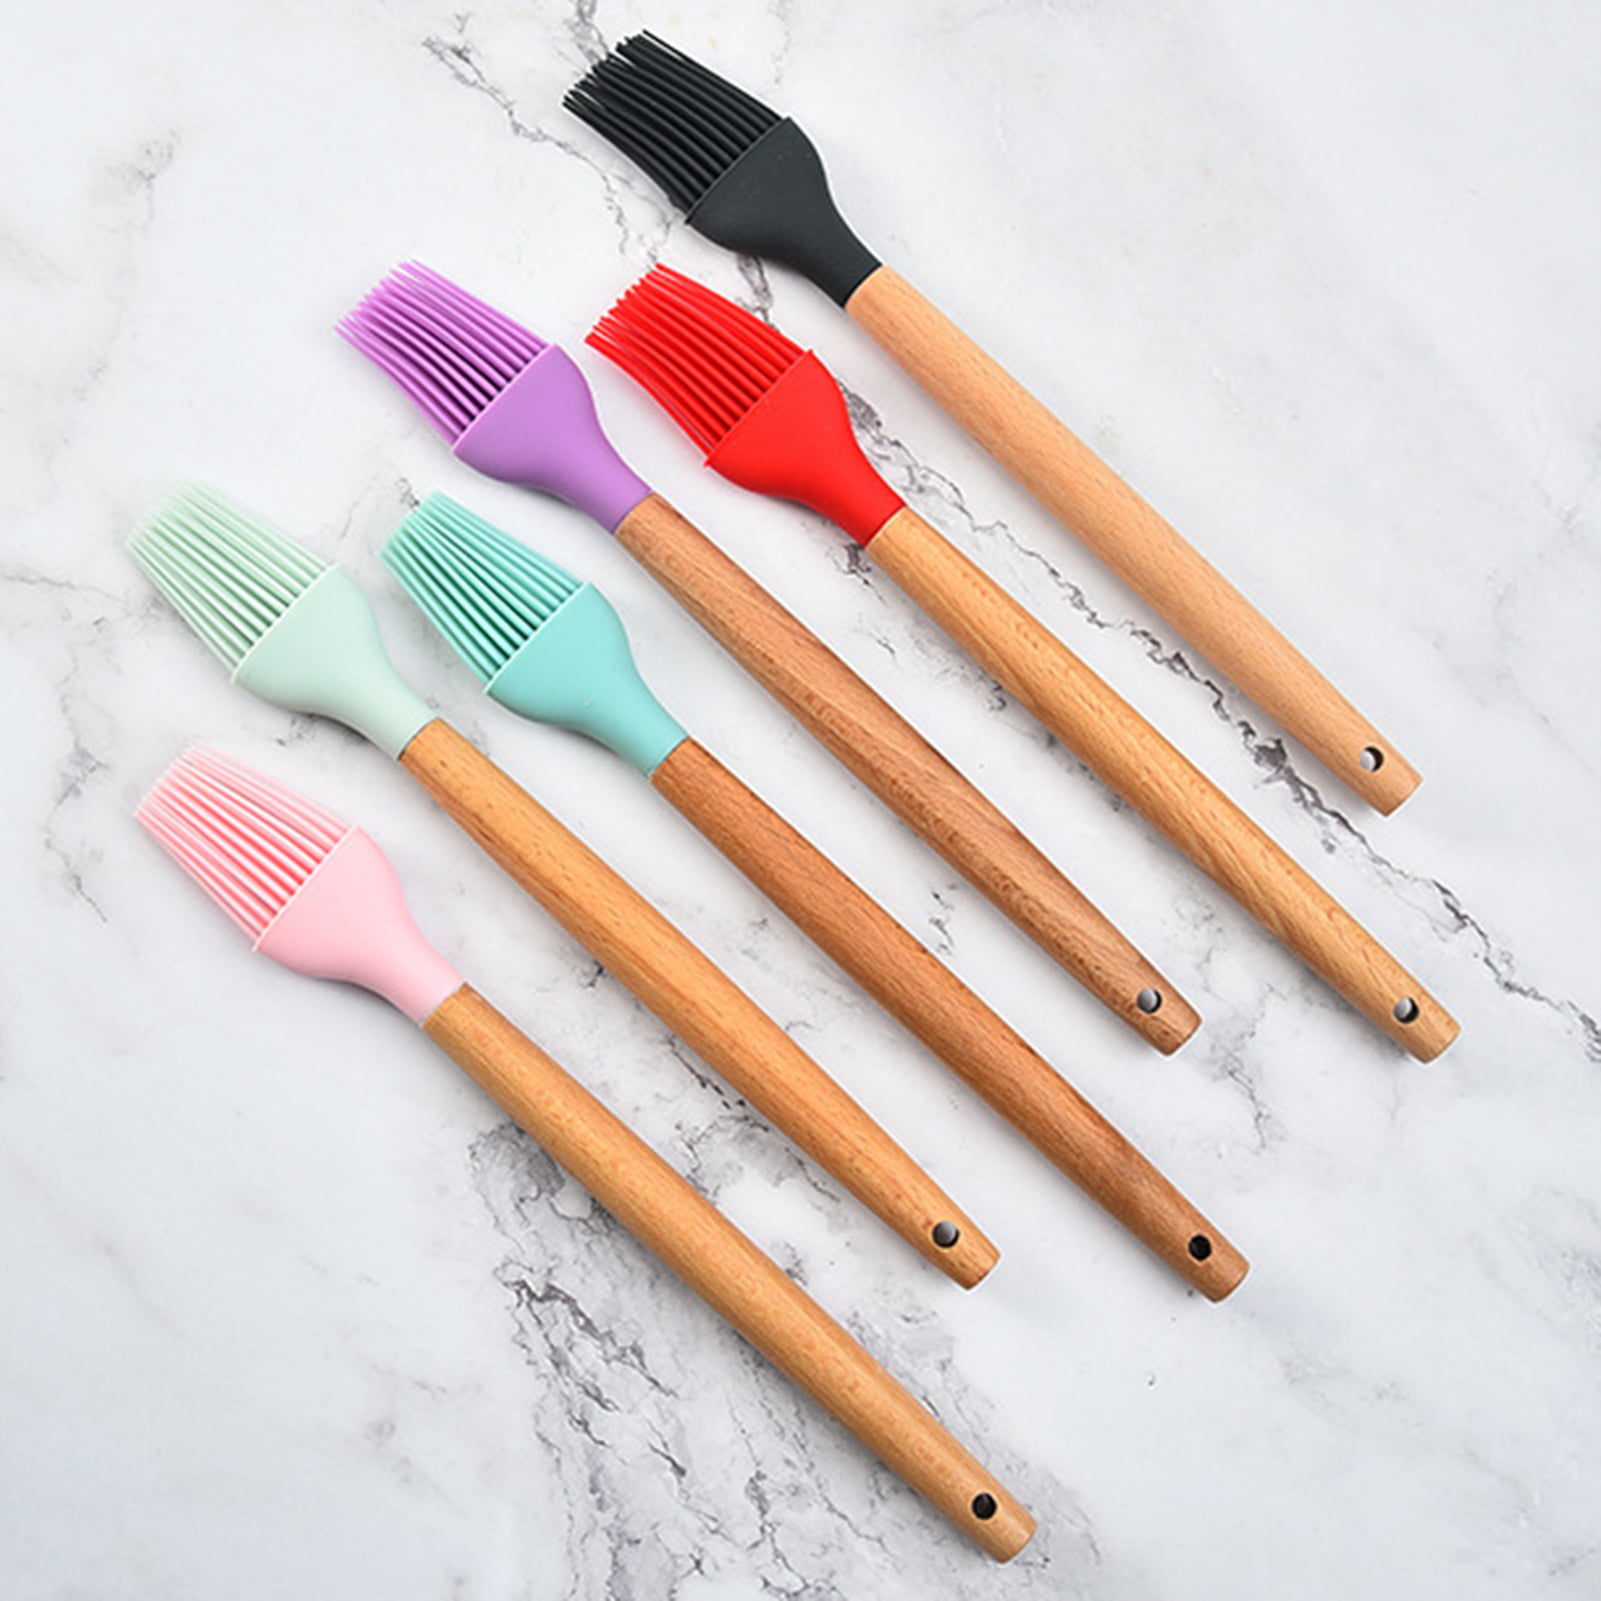 XMMSWDLA Silicone Basting Brush Set, Heat Resistant Pastry Brush, Perfect  for Baking,BBQ Grill,Kitchen Cooking,Strong Steel Core and One-Pieces  Design,BPA Free and Dishwasher Safe 